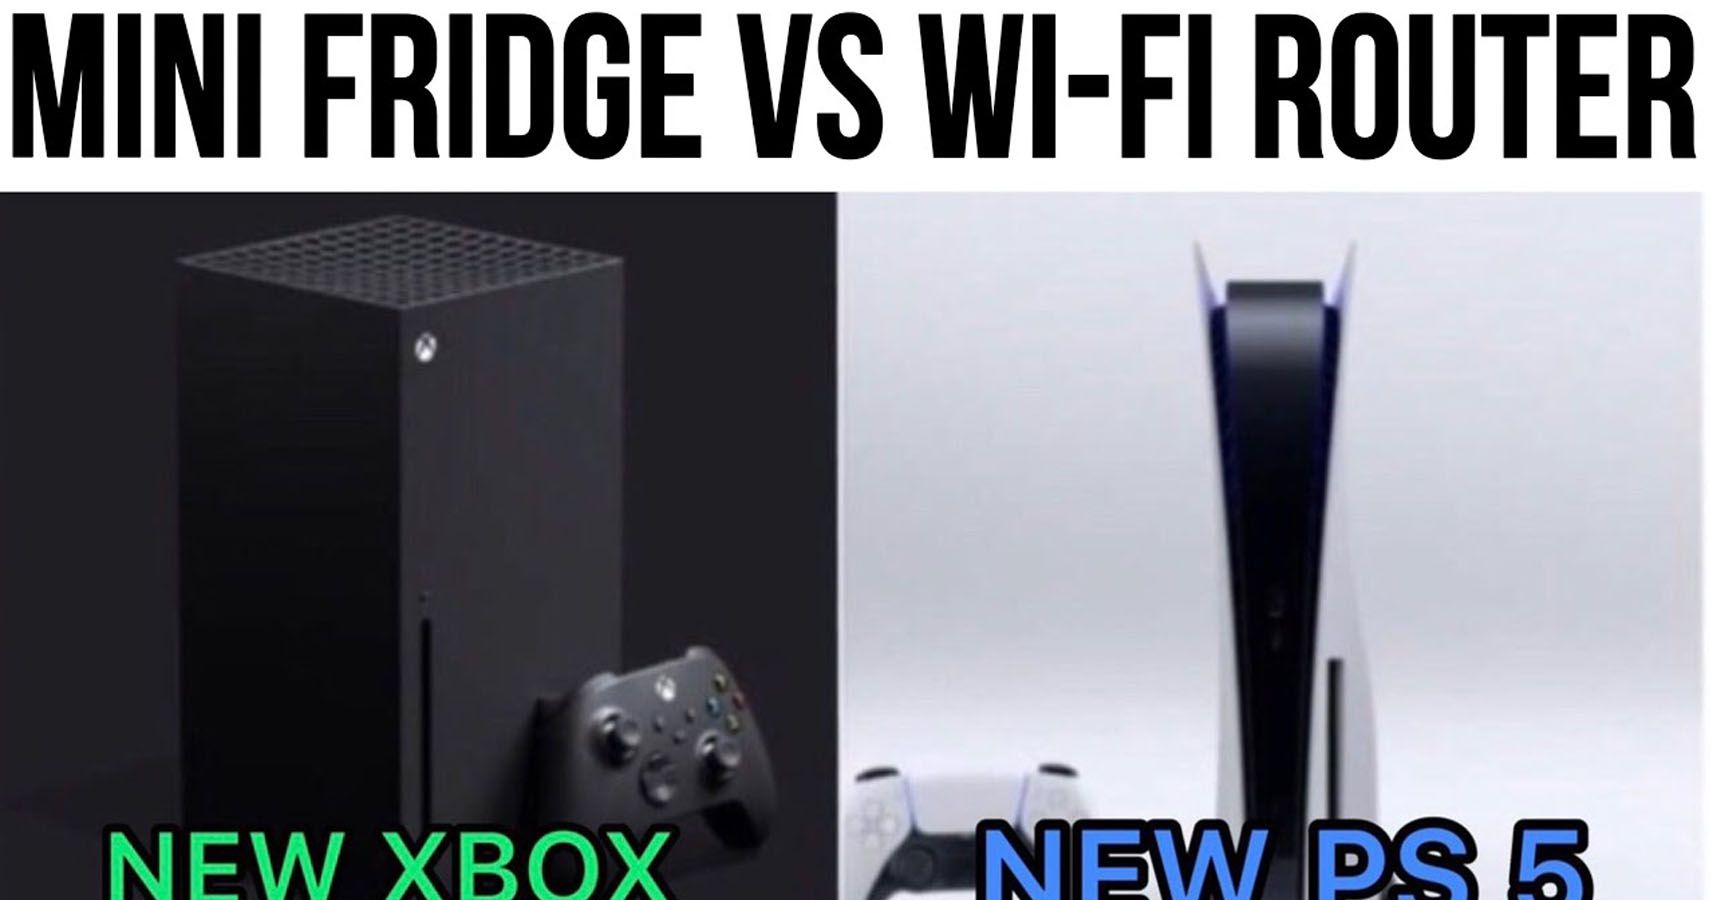 Who would win? New Xbox, A mini fridge; Or New PS5, a Wifi Router